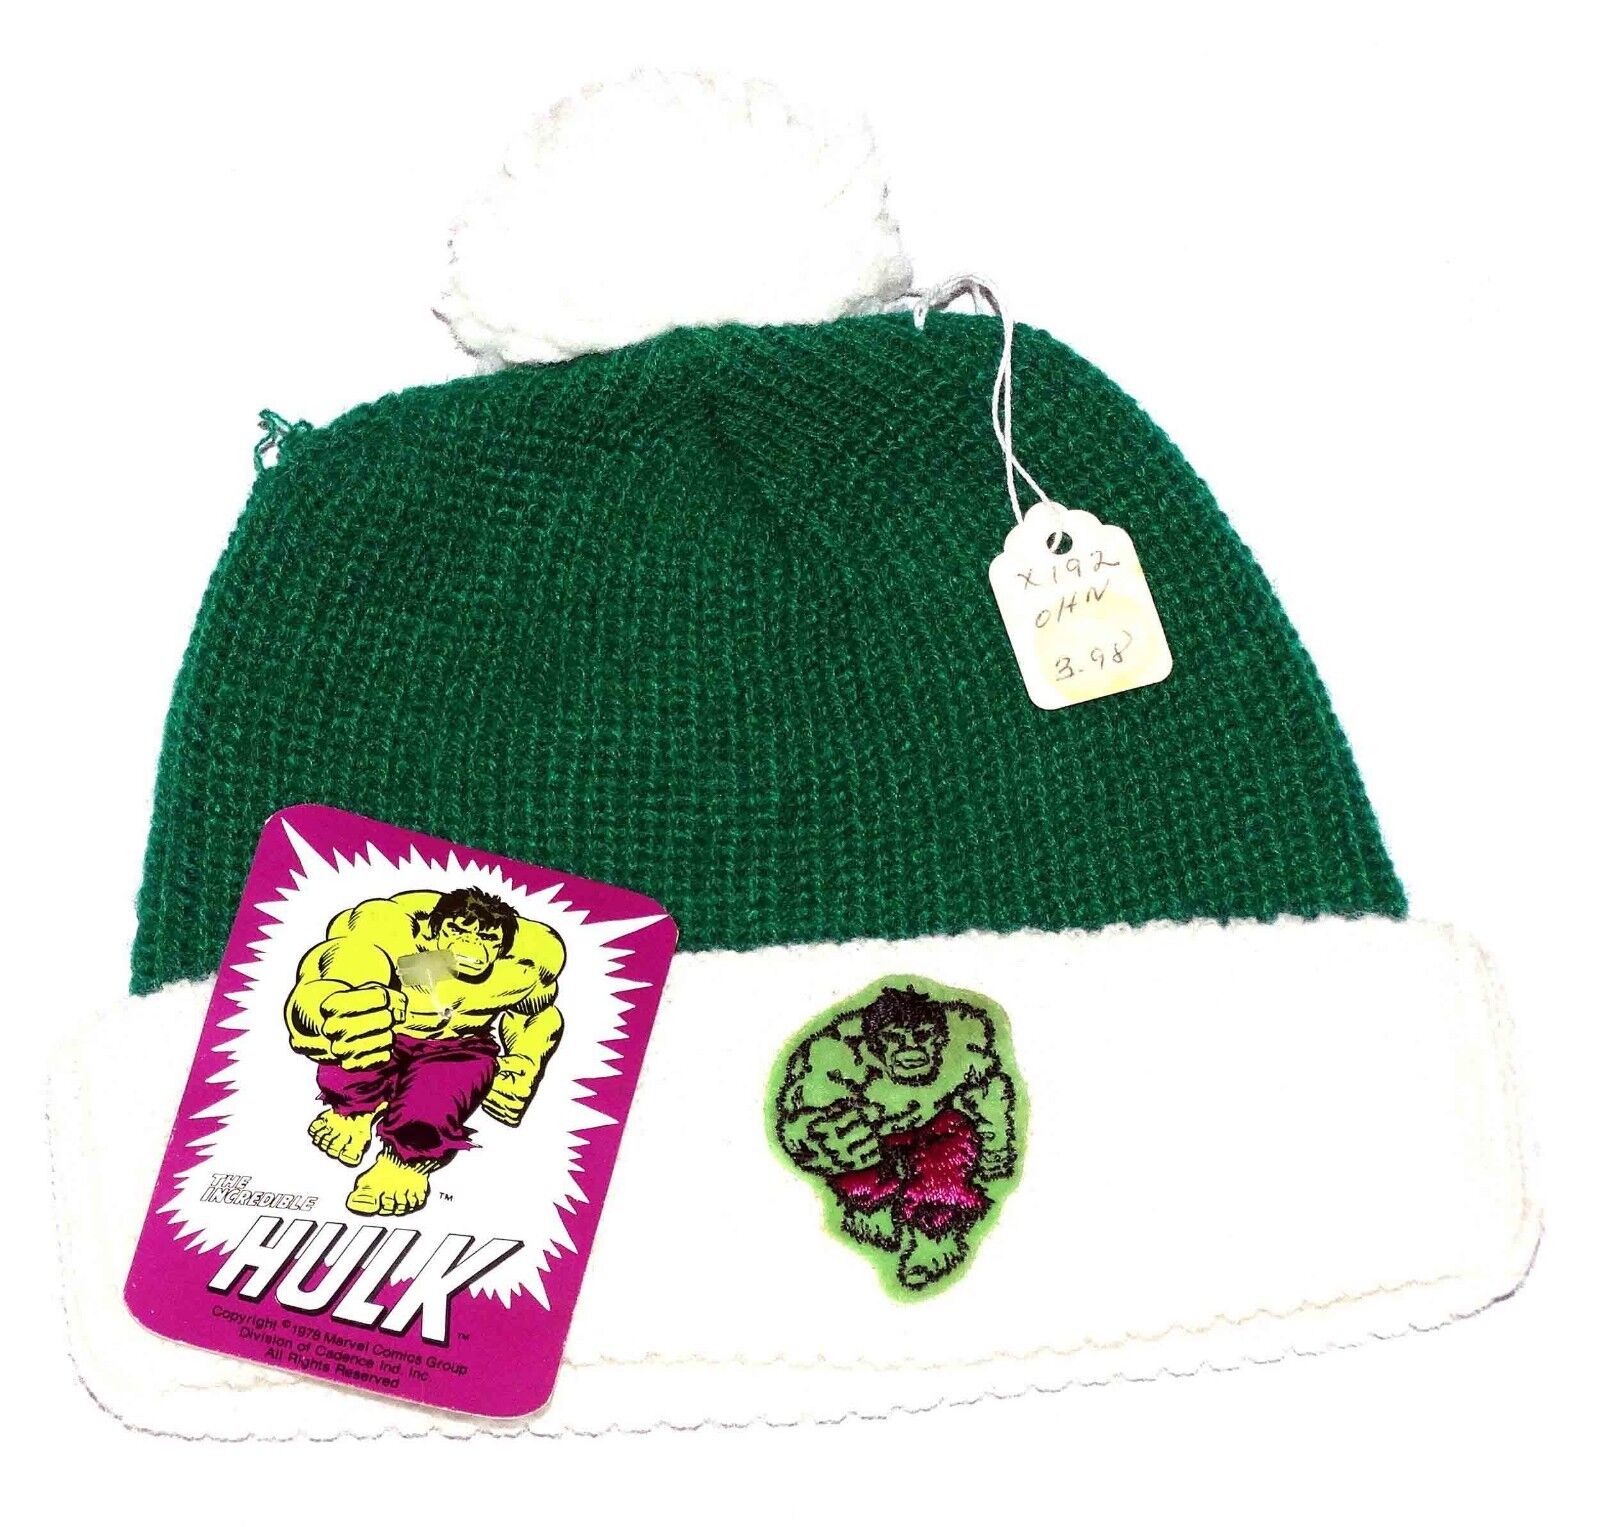 Incredible Hulk Beanie Knit Cap/Hat with Patch Marvelmania Vintage 1978 Tagged